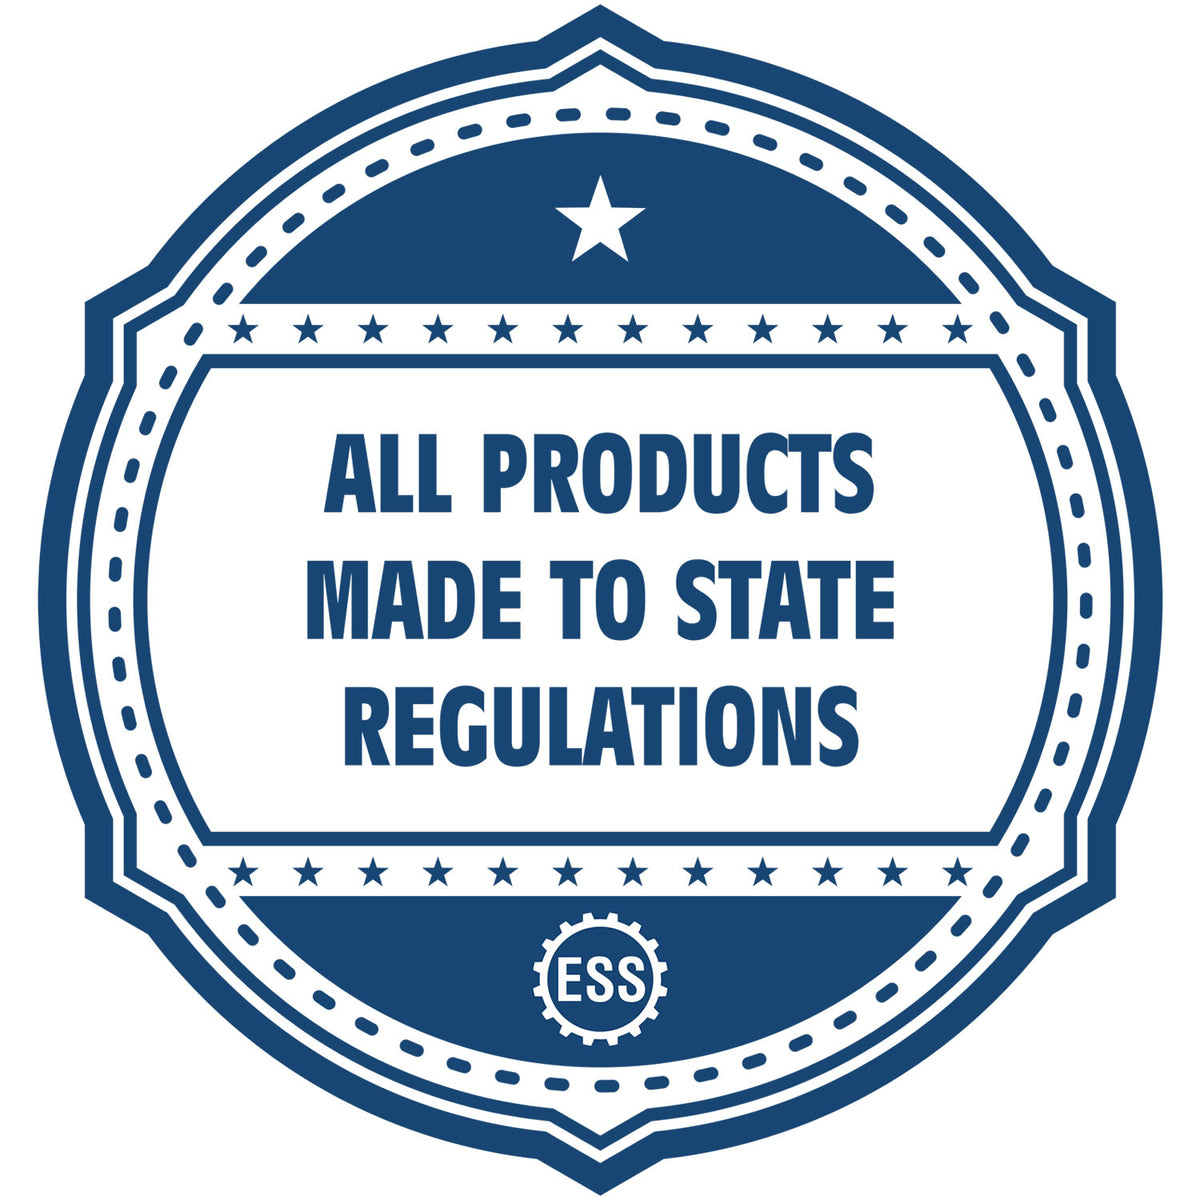 An icon or badge element for the Slim Pre-Inked Delaware Land Surveyor Seal Stamp showing that this product is made in compliance with state regulations.